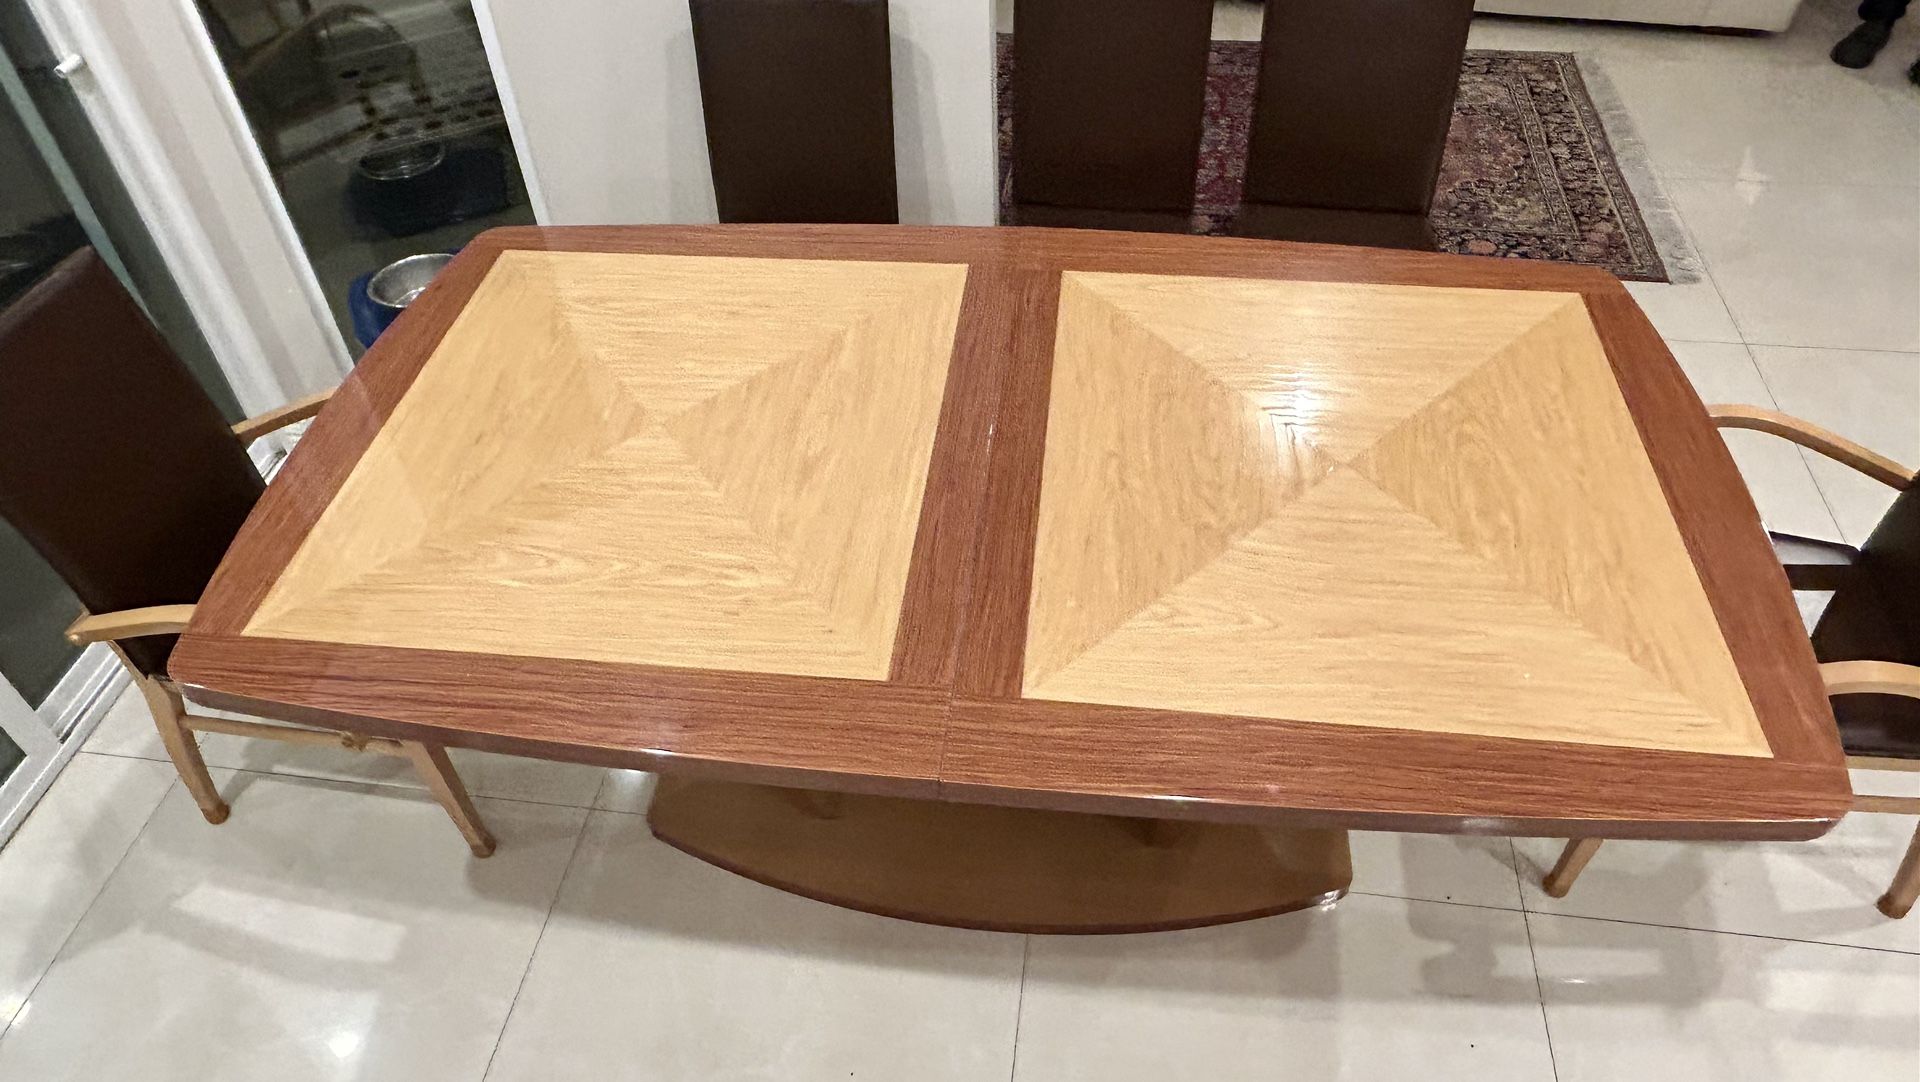 Dining Table & Chairs 